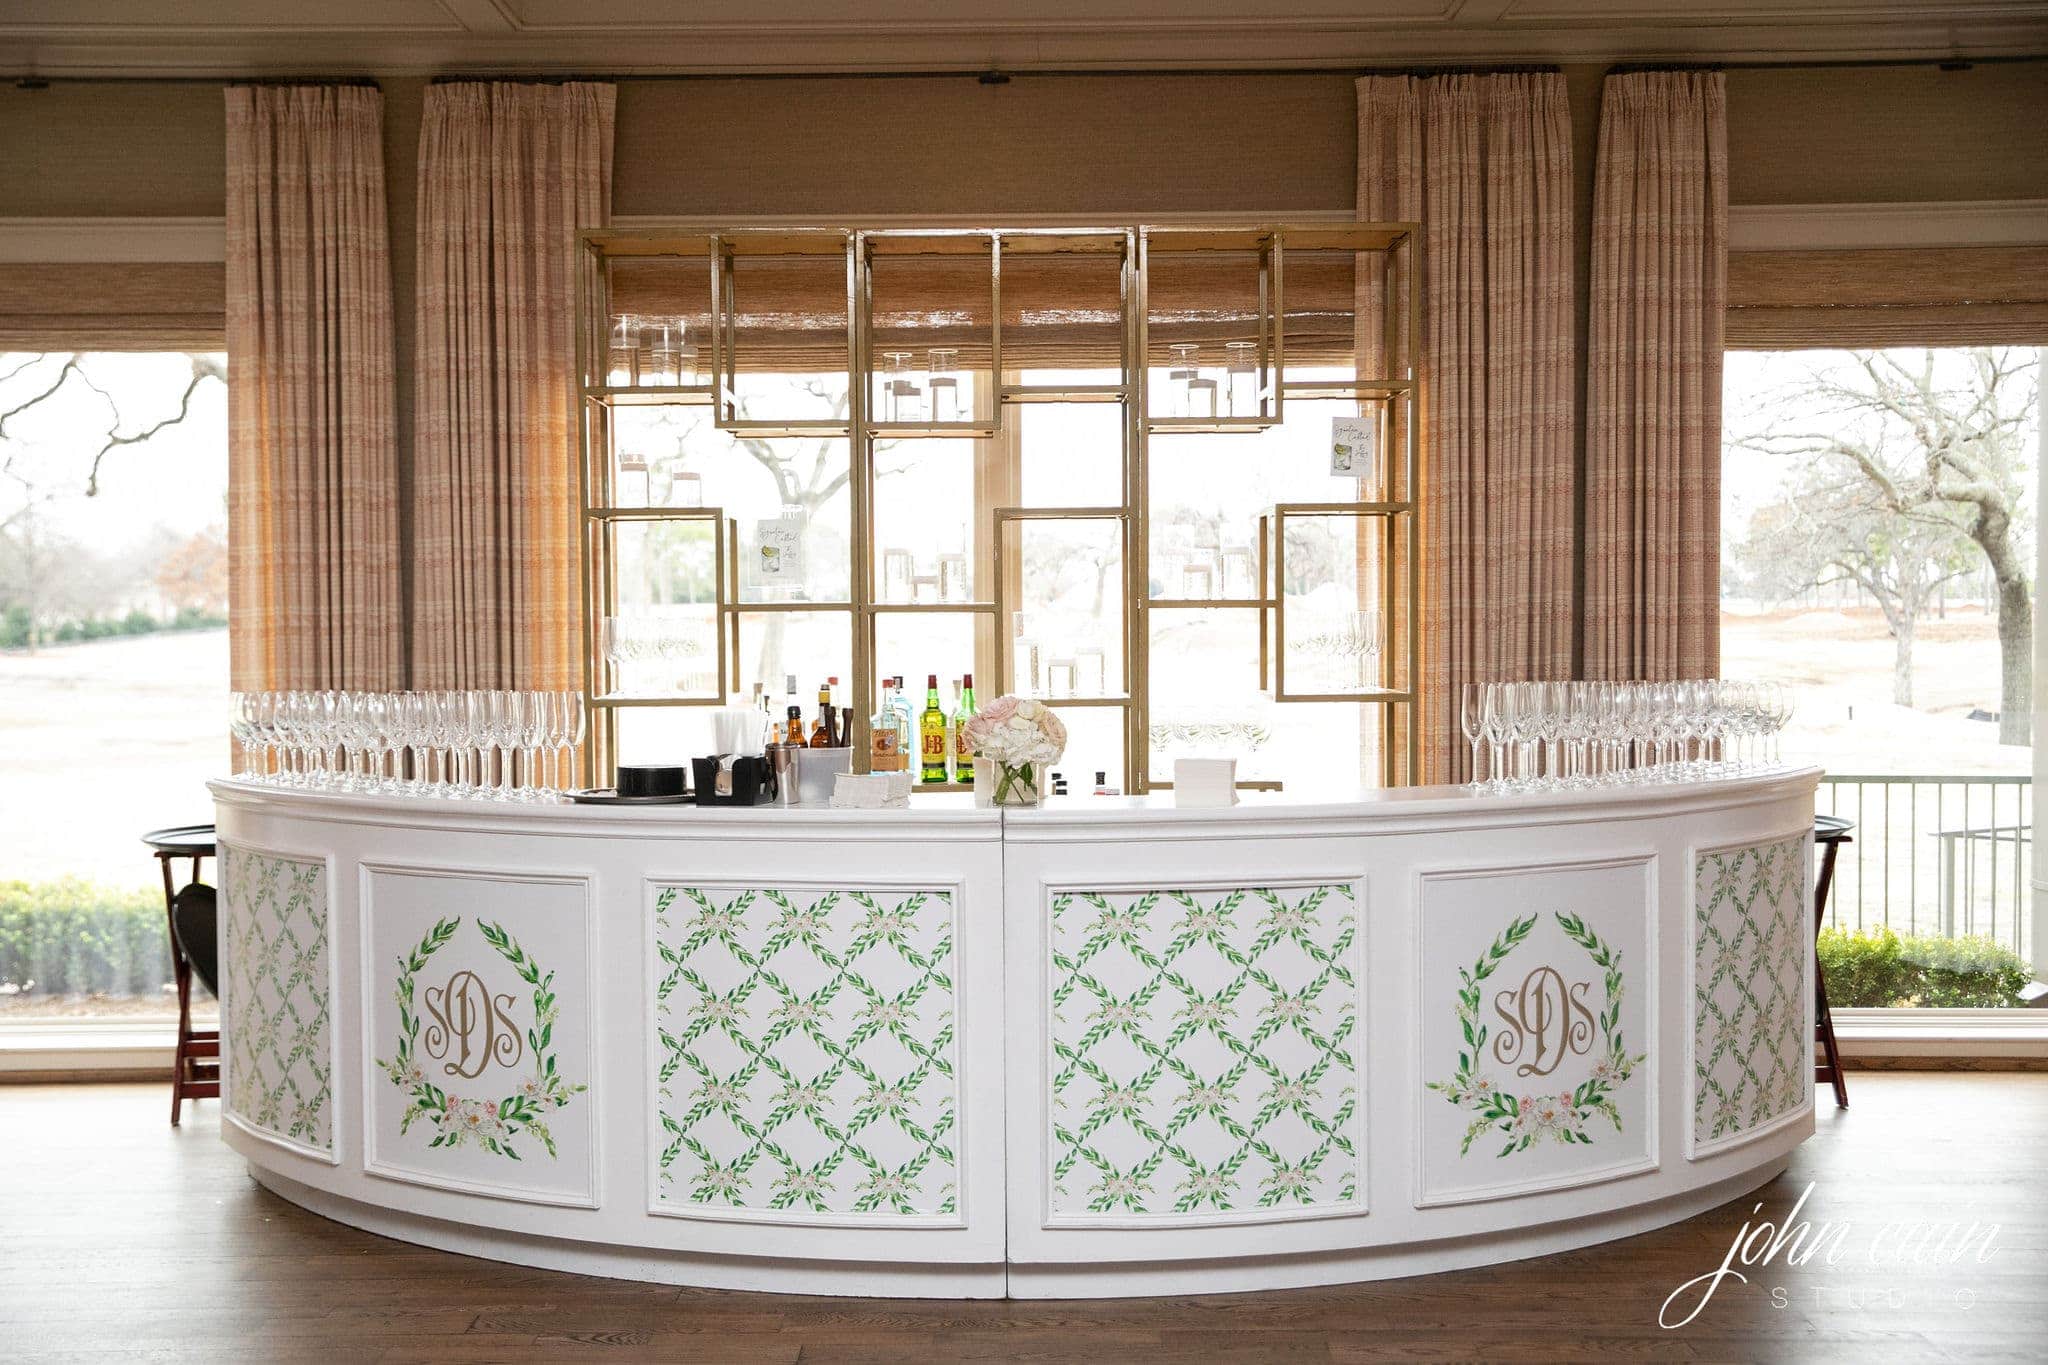 Spotlight on Bars: These Customizable Event Rentals Are “Bar None!”